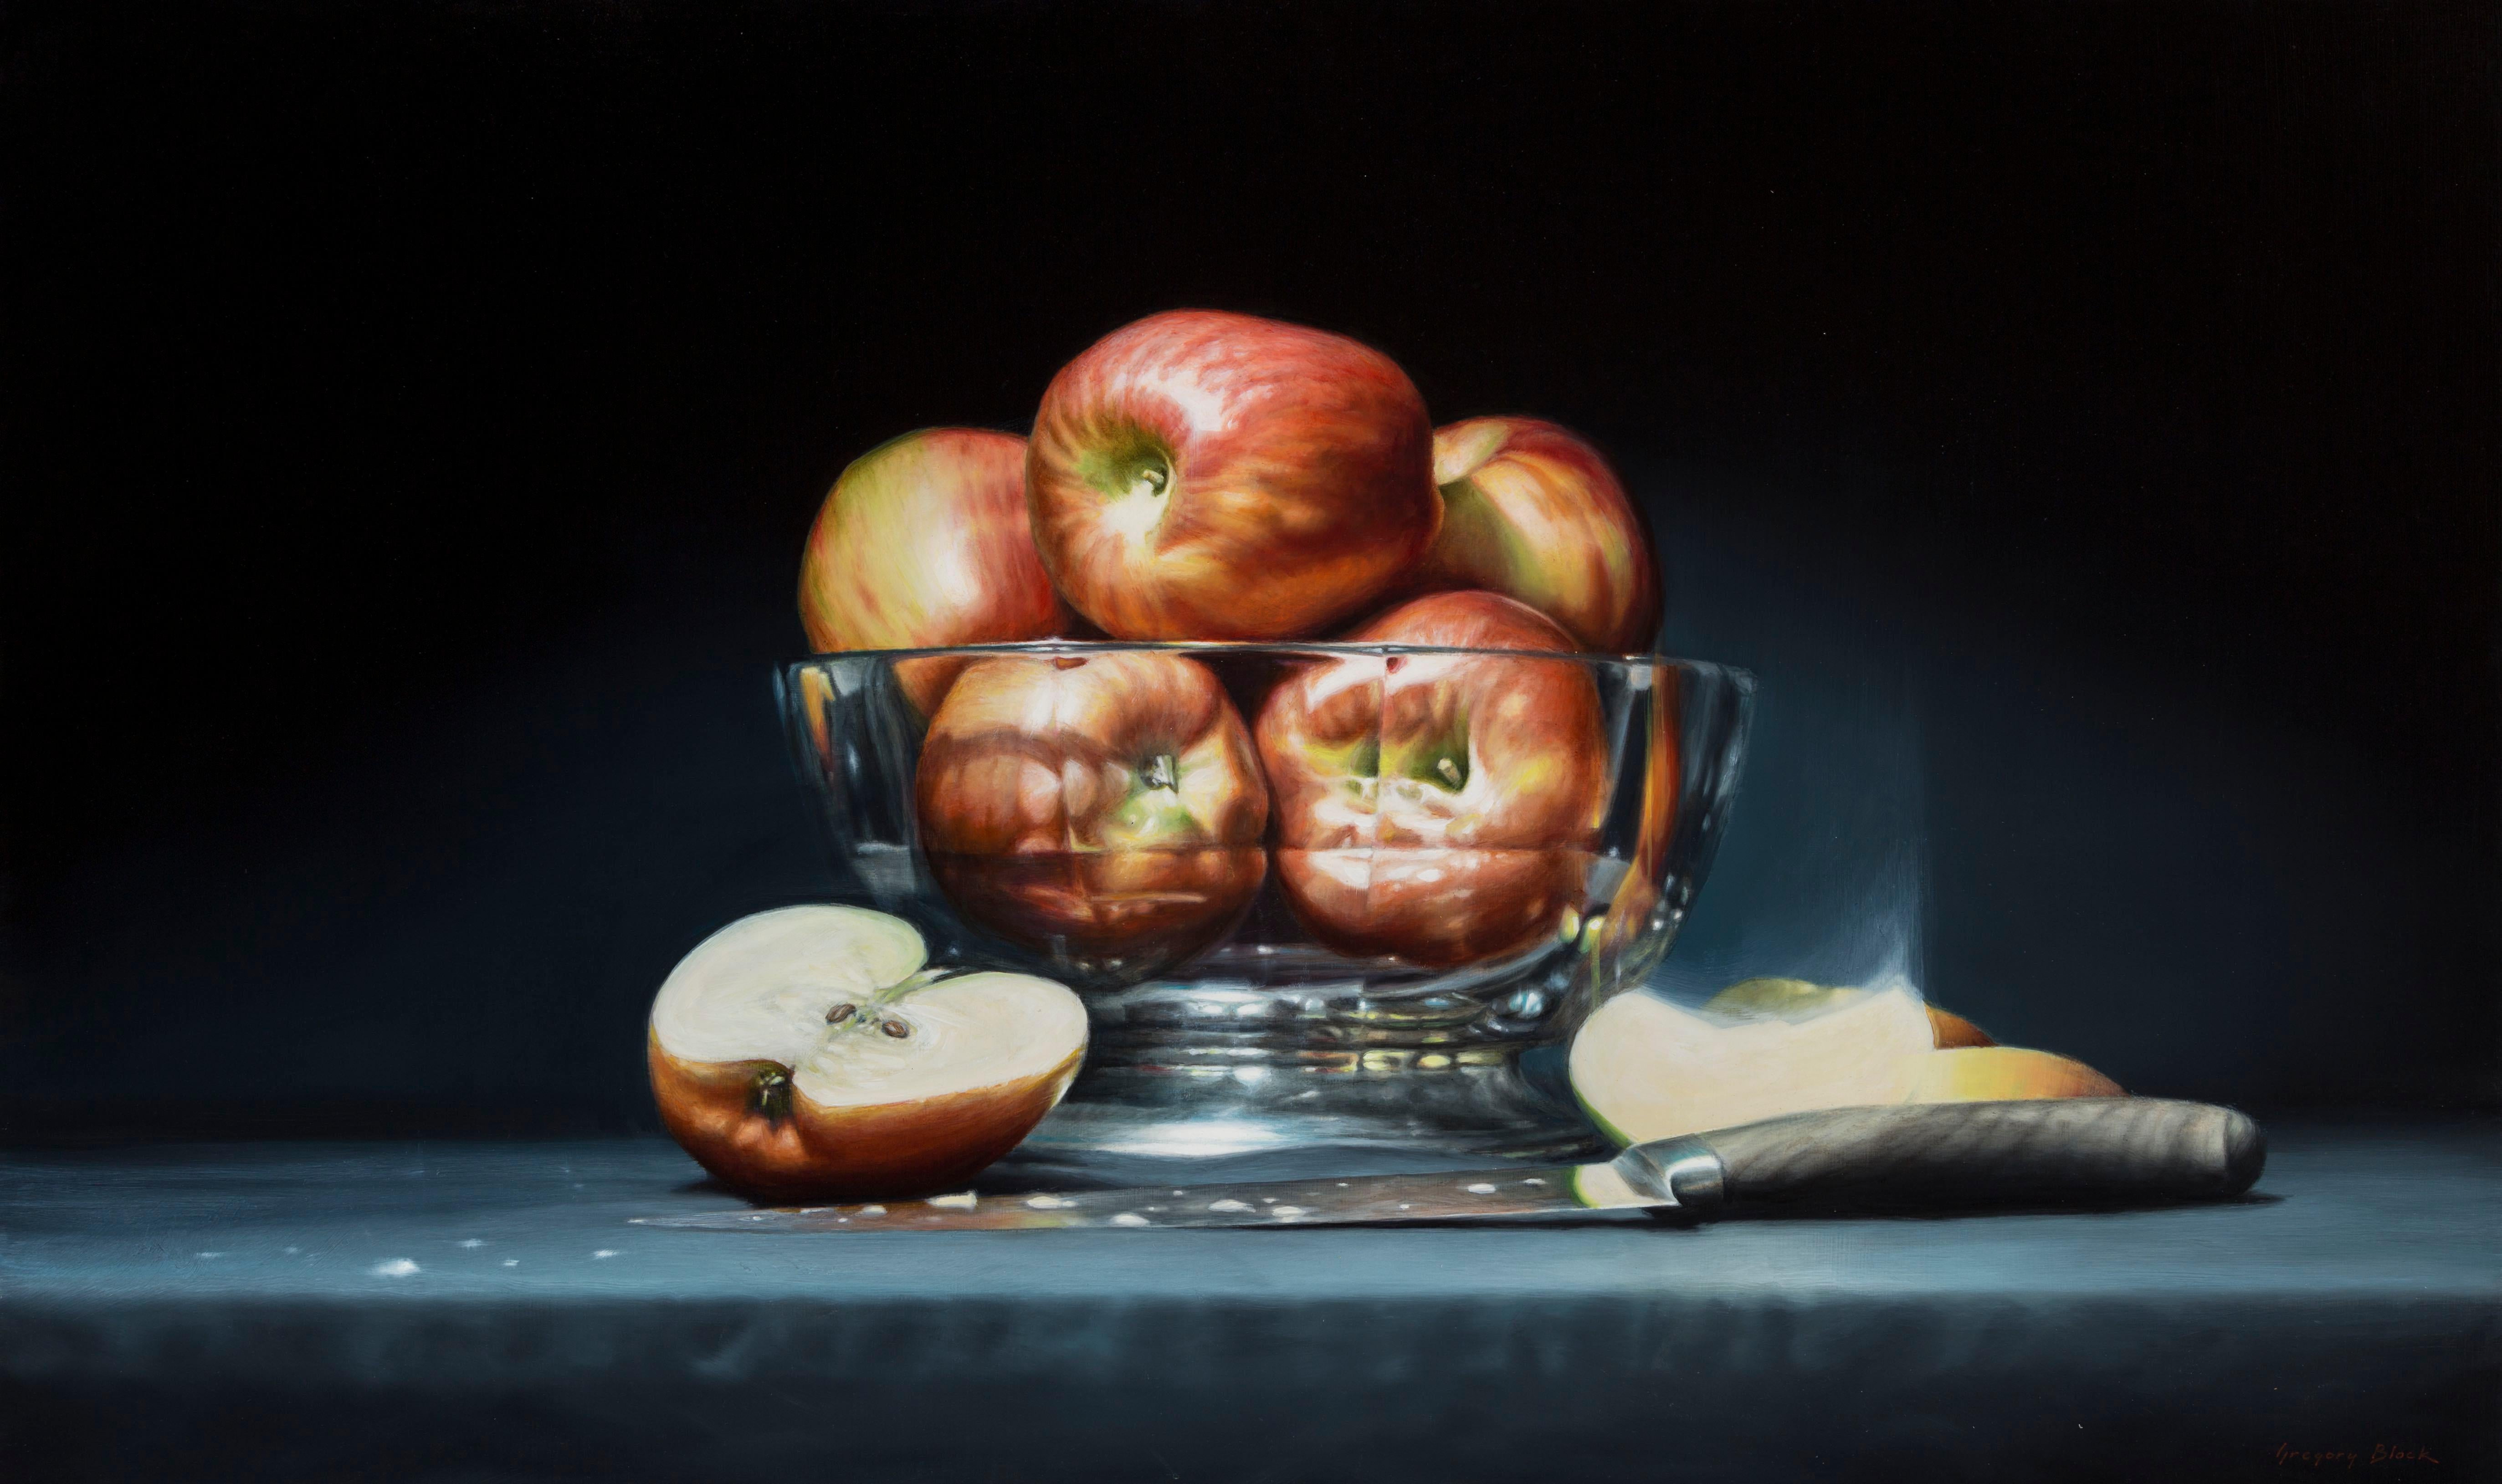 "Apples" Oil Painting